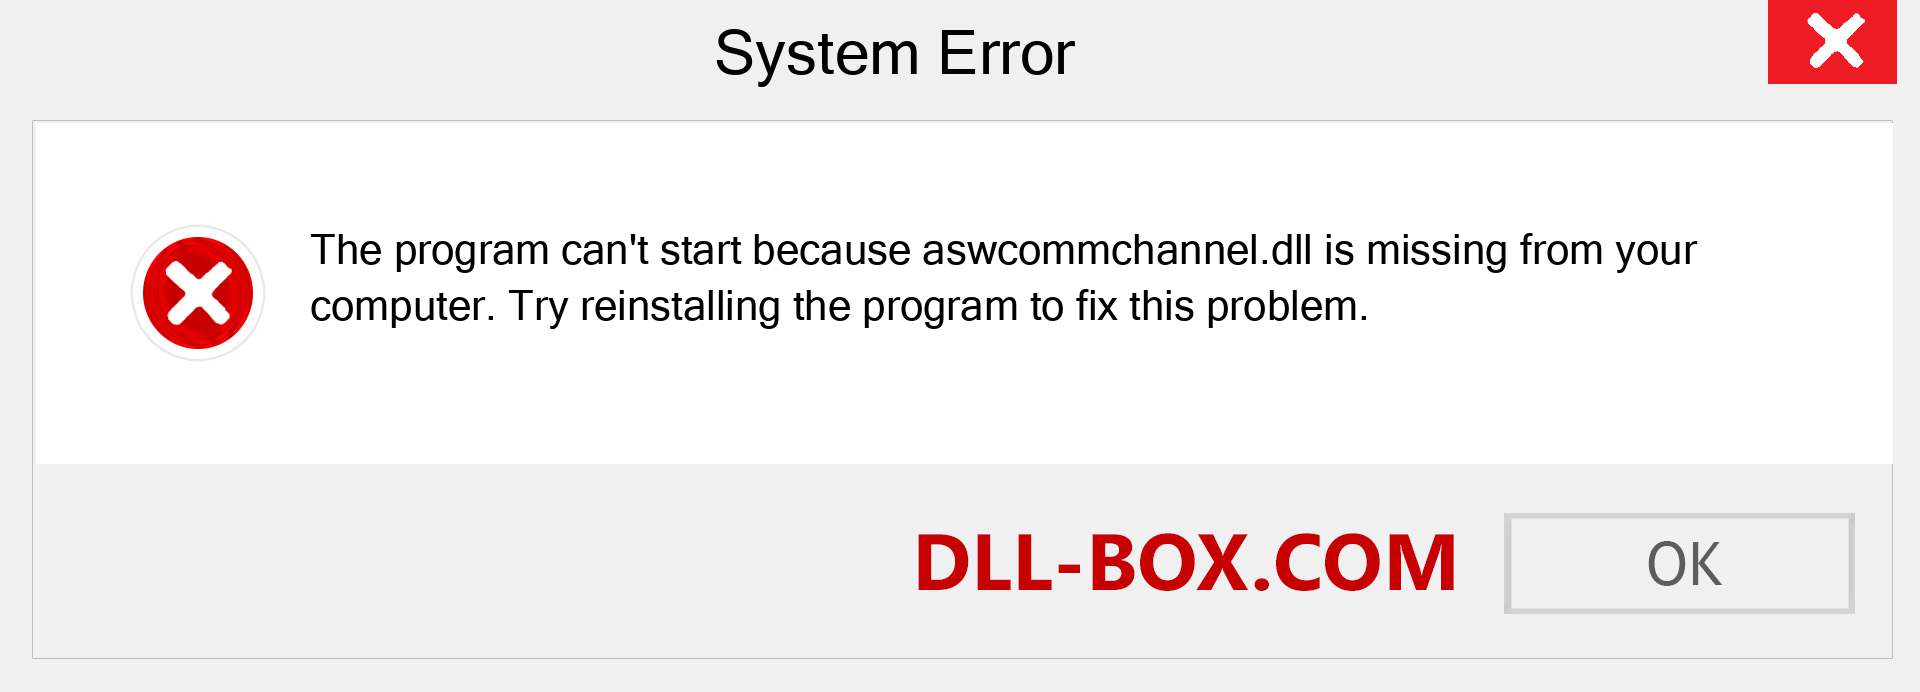  aswcommchannel.dll file is missing?. Download for Windows 7, 8, 10 - Fix  aswcommchannel dll Missing Error on Windows, photos, images